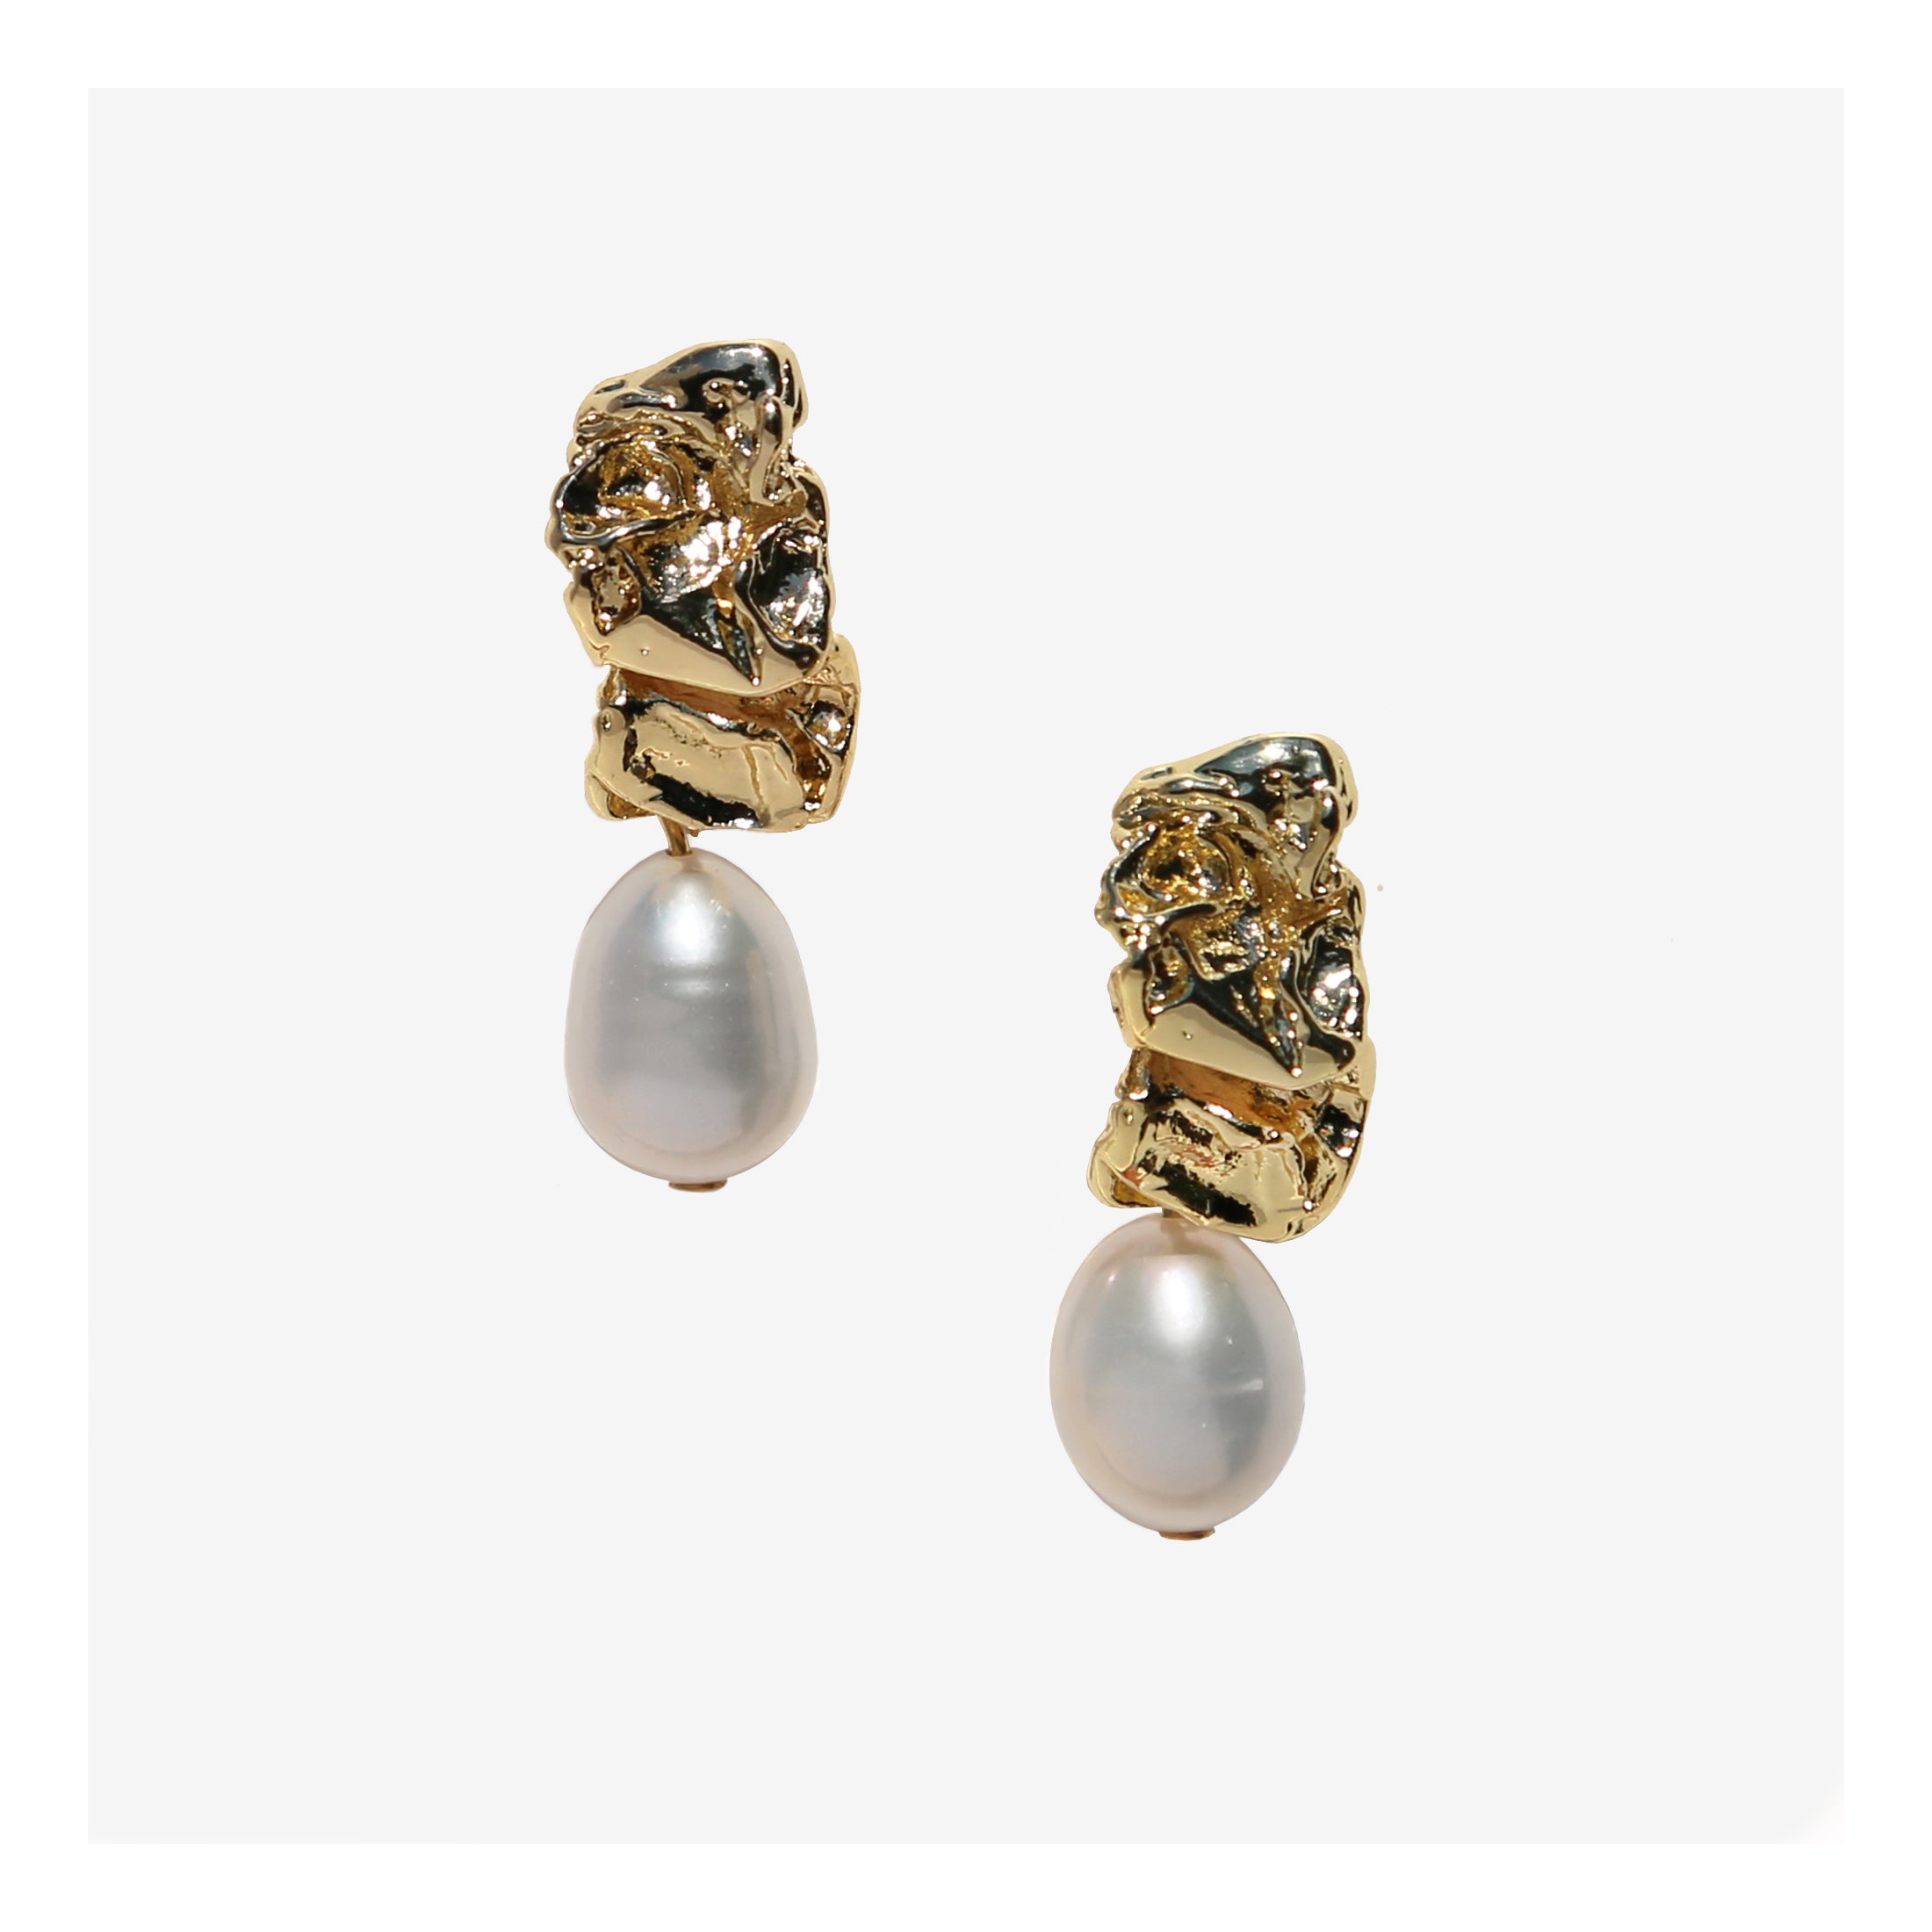 Gold crushed metal stud and pearl drop earring.